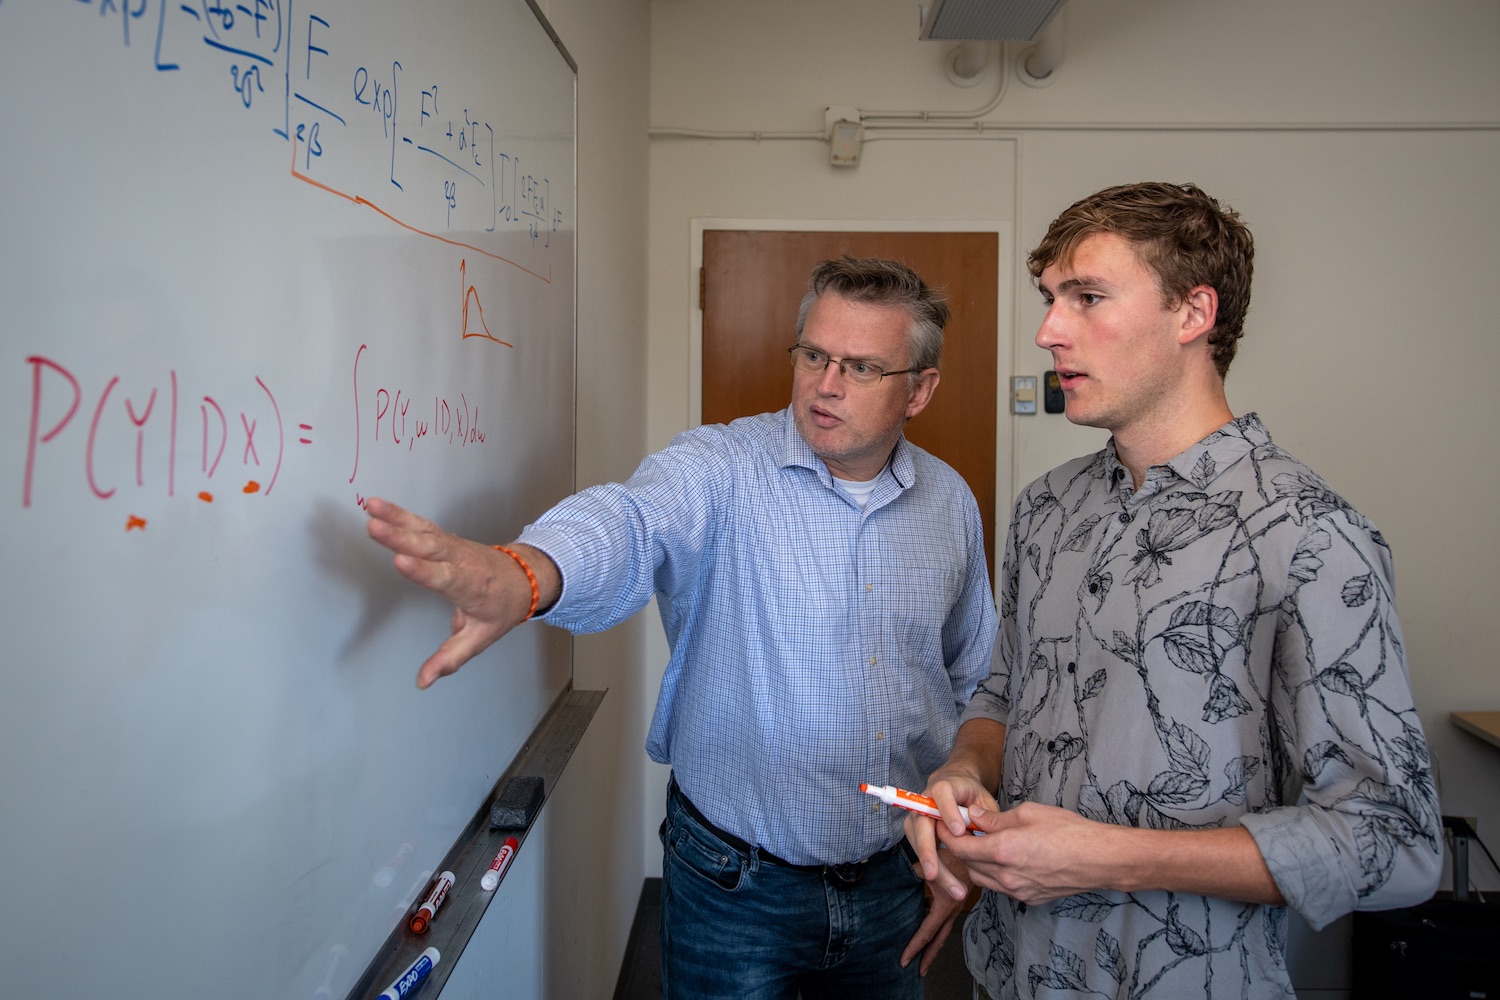 Berkeley Lab intern and scientist working together on algorithms for crystallography 